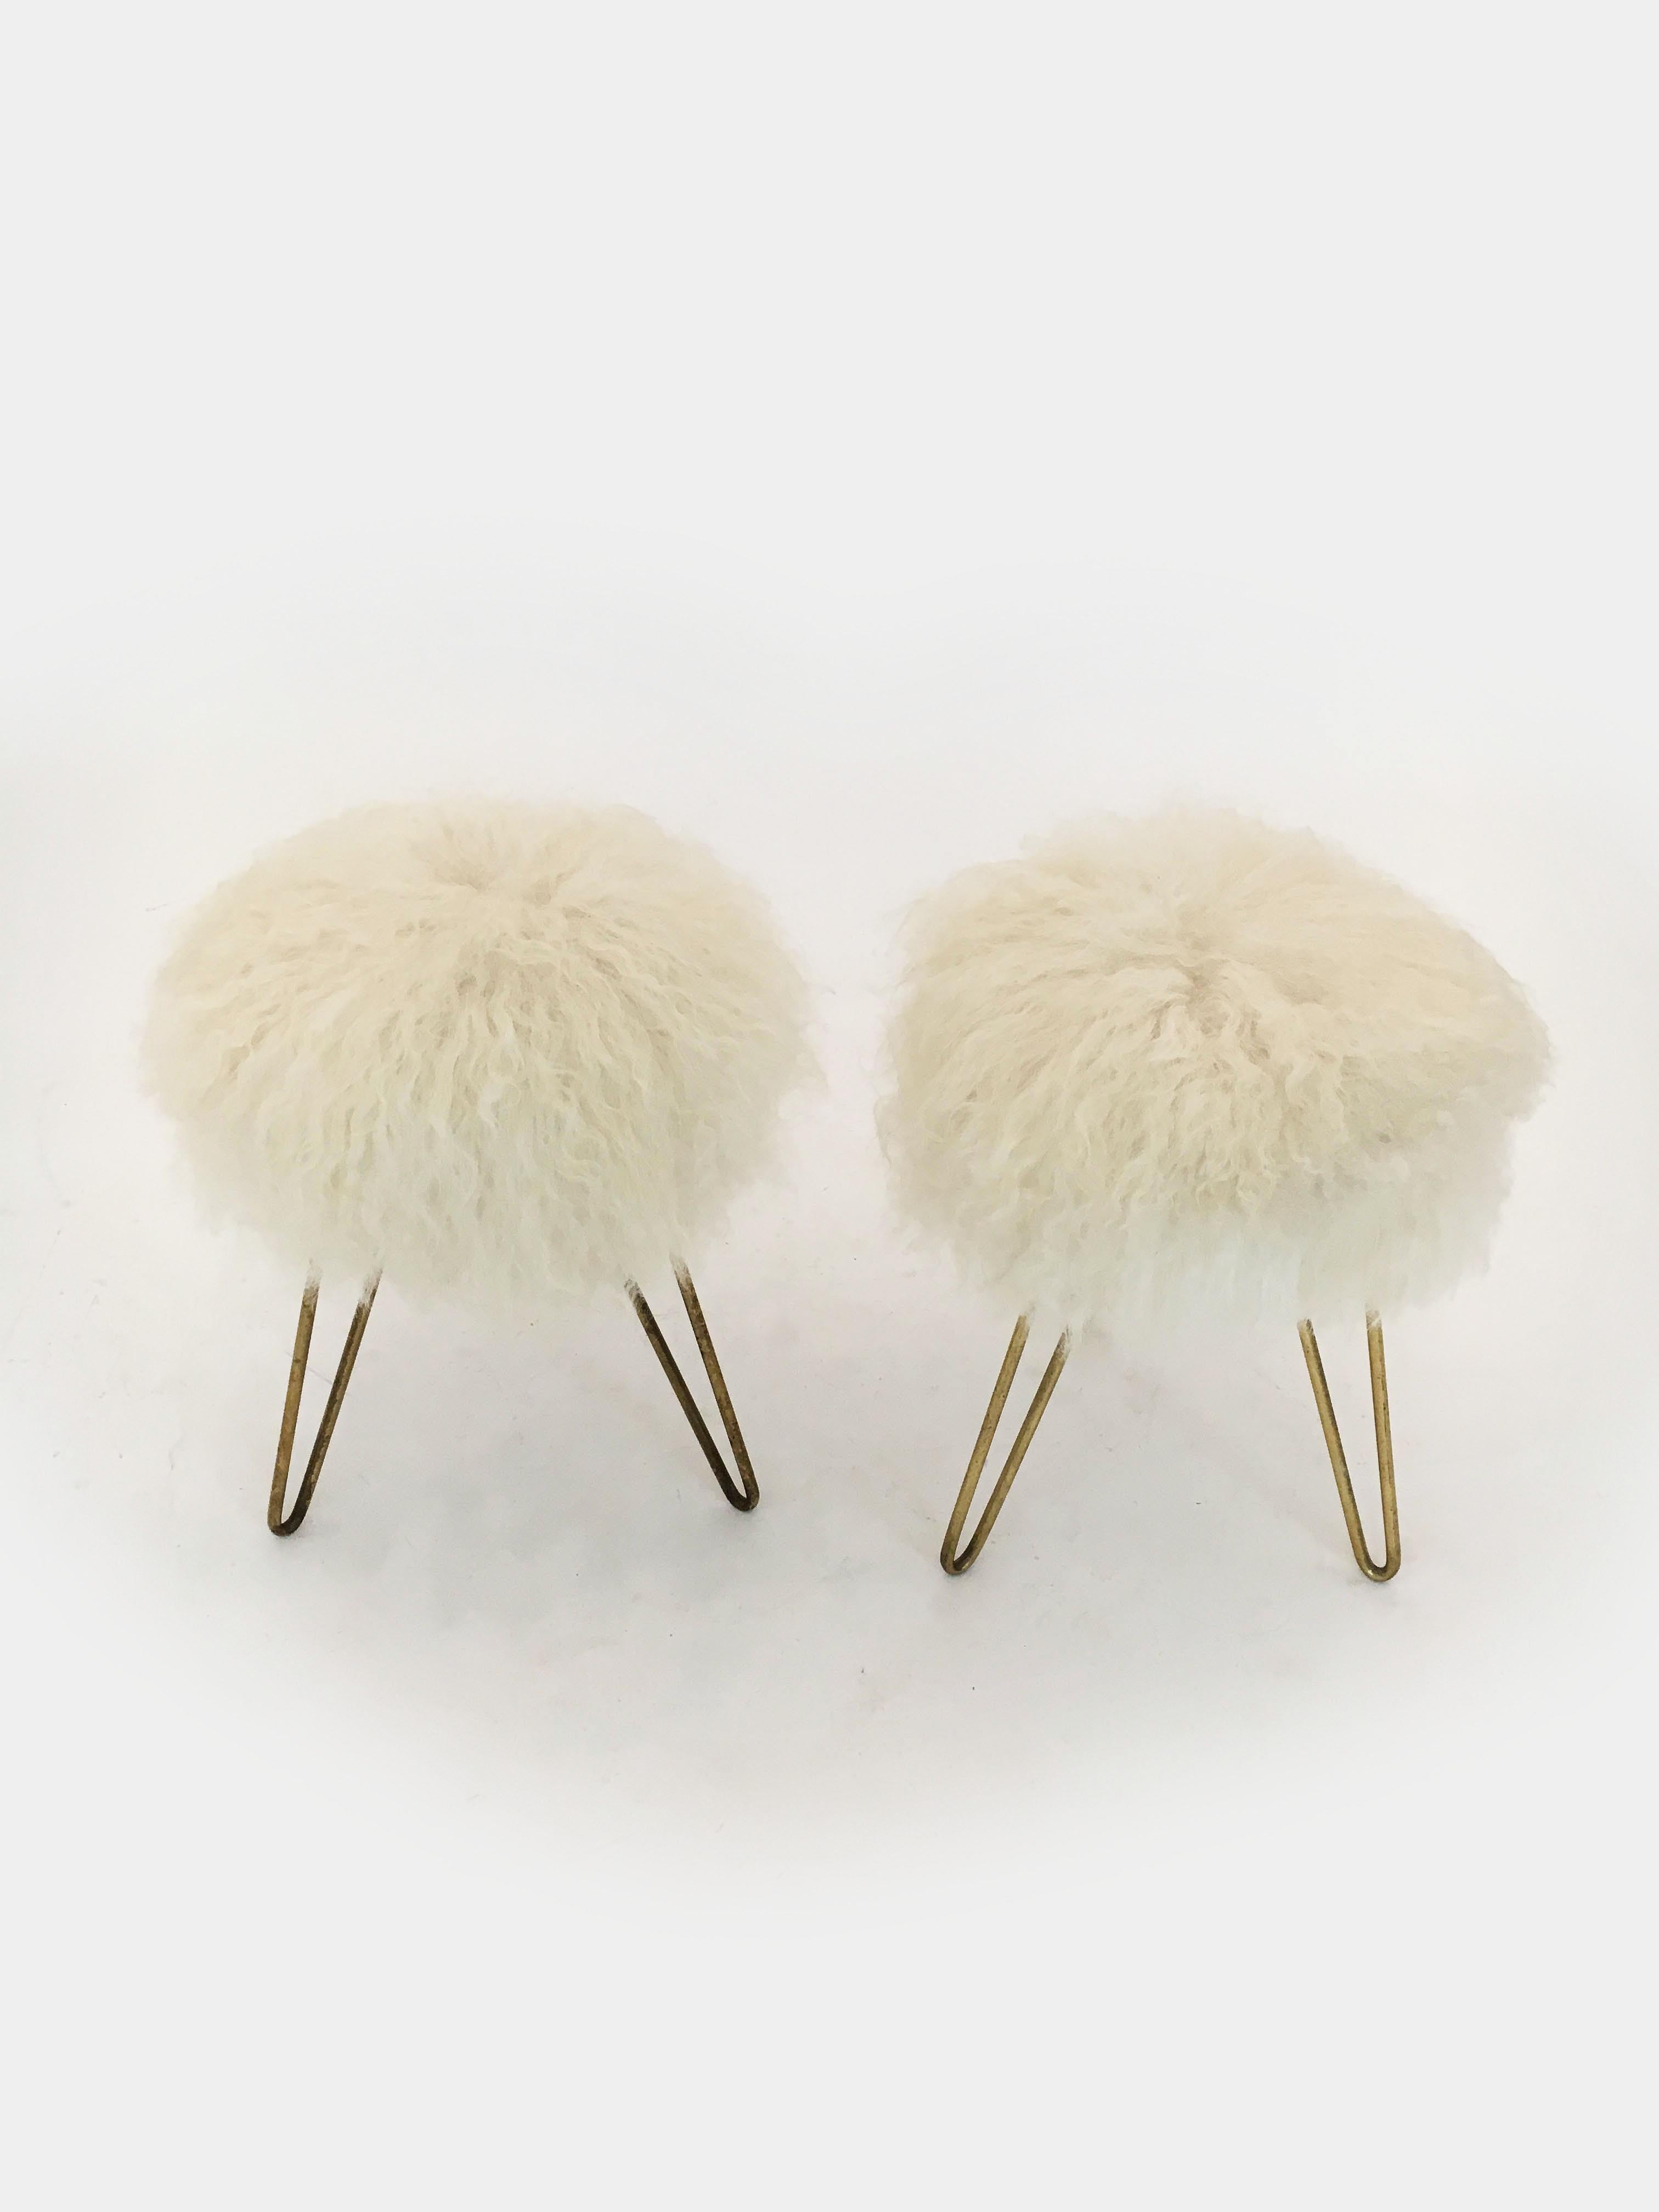 Pair of Sheep Fur Stools, France, 1950s For Sale 3